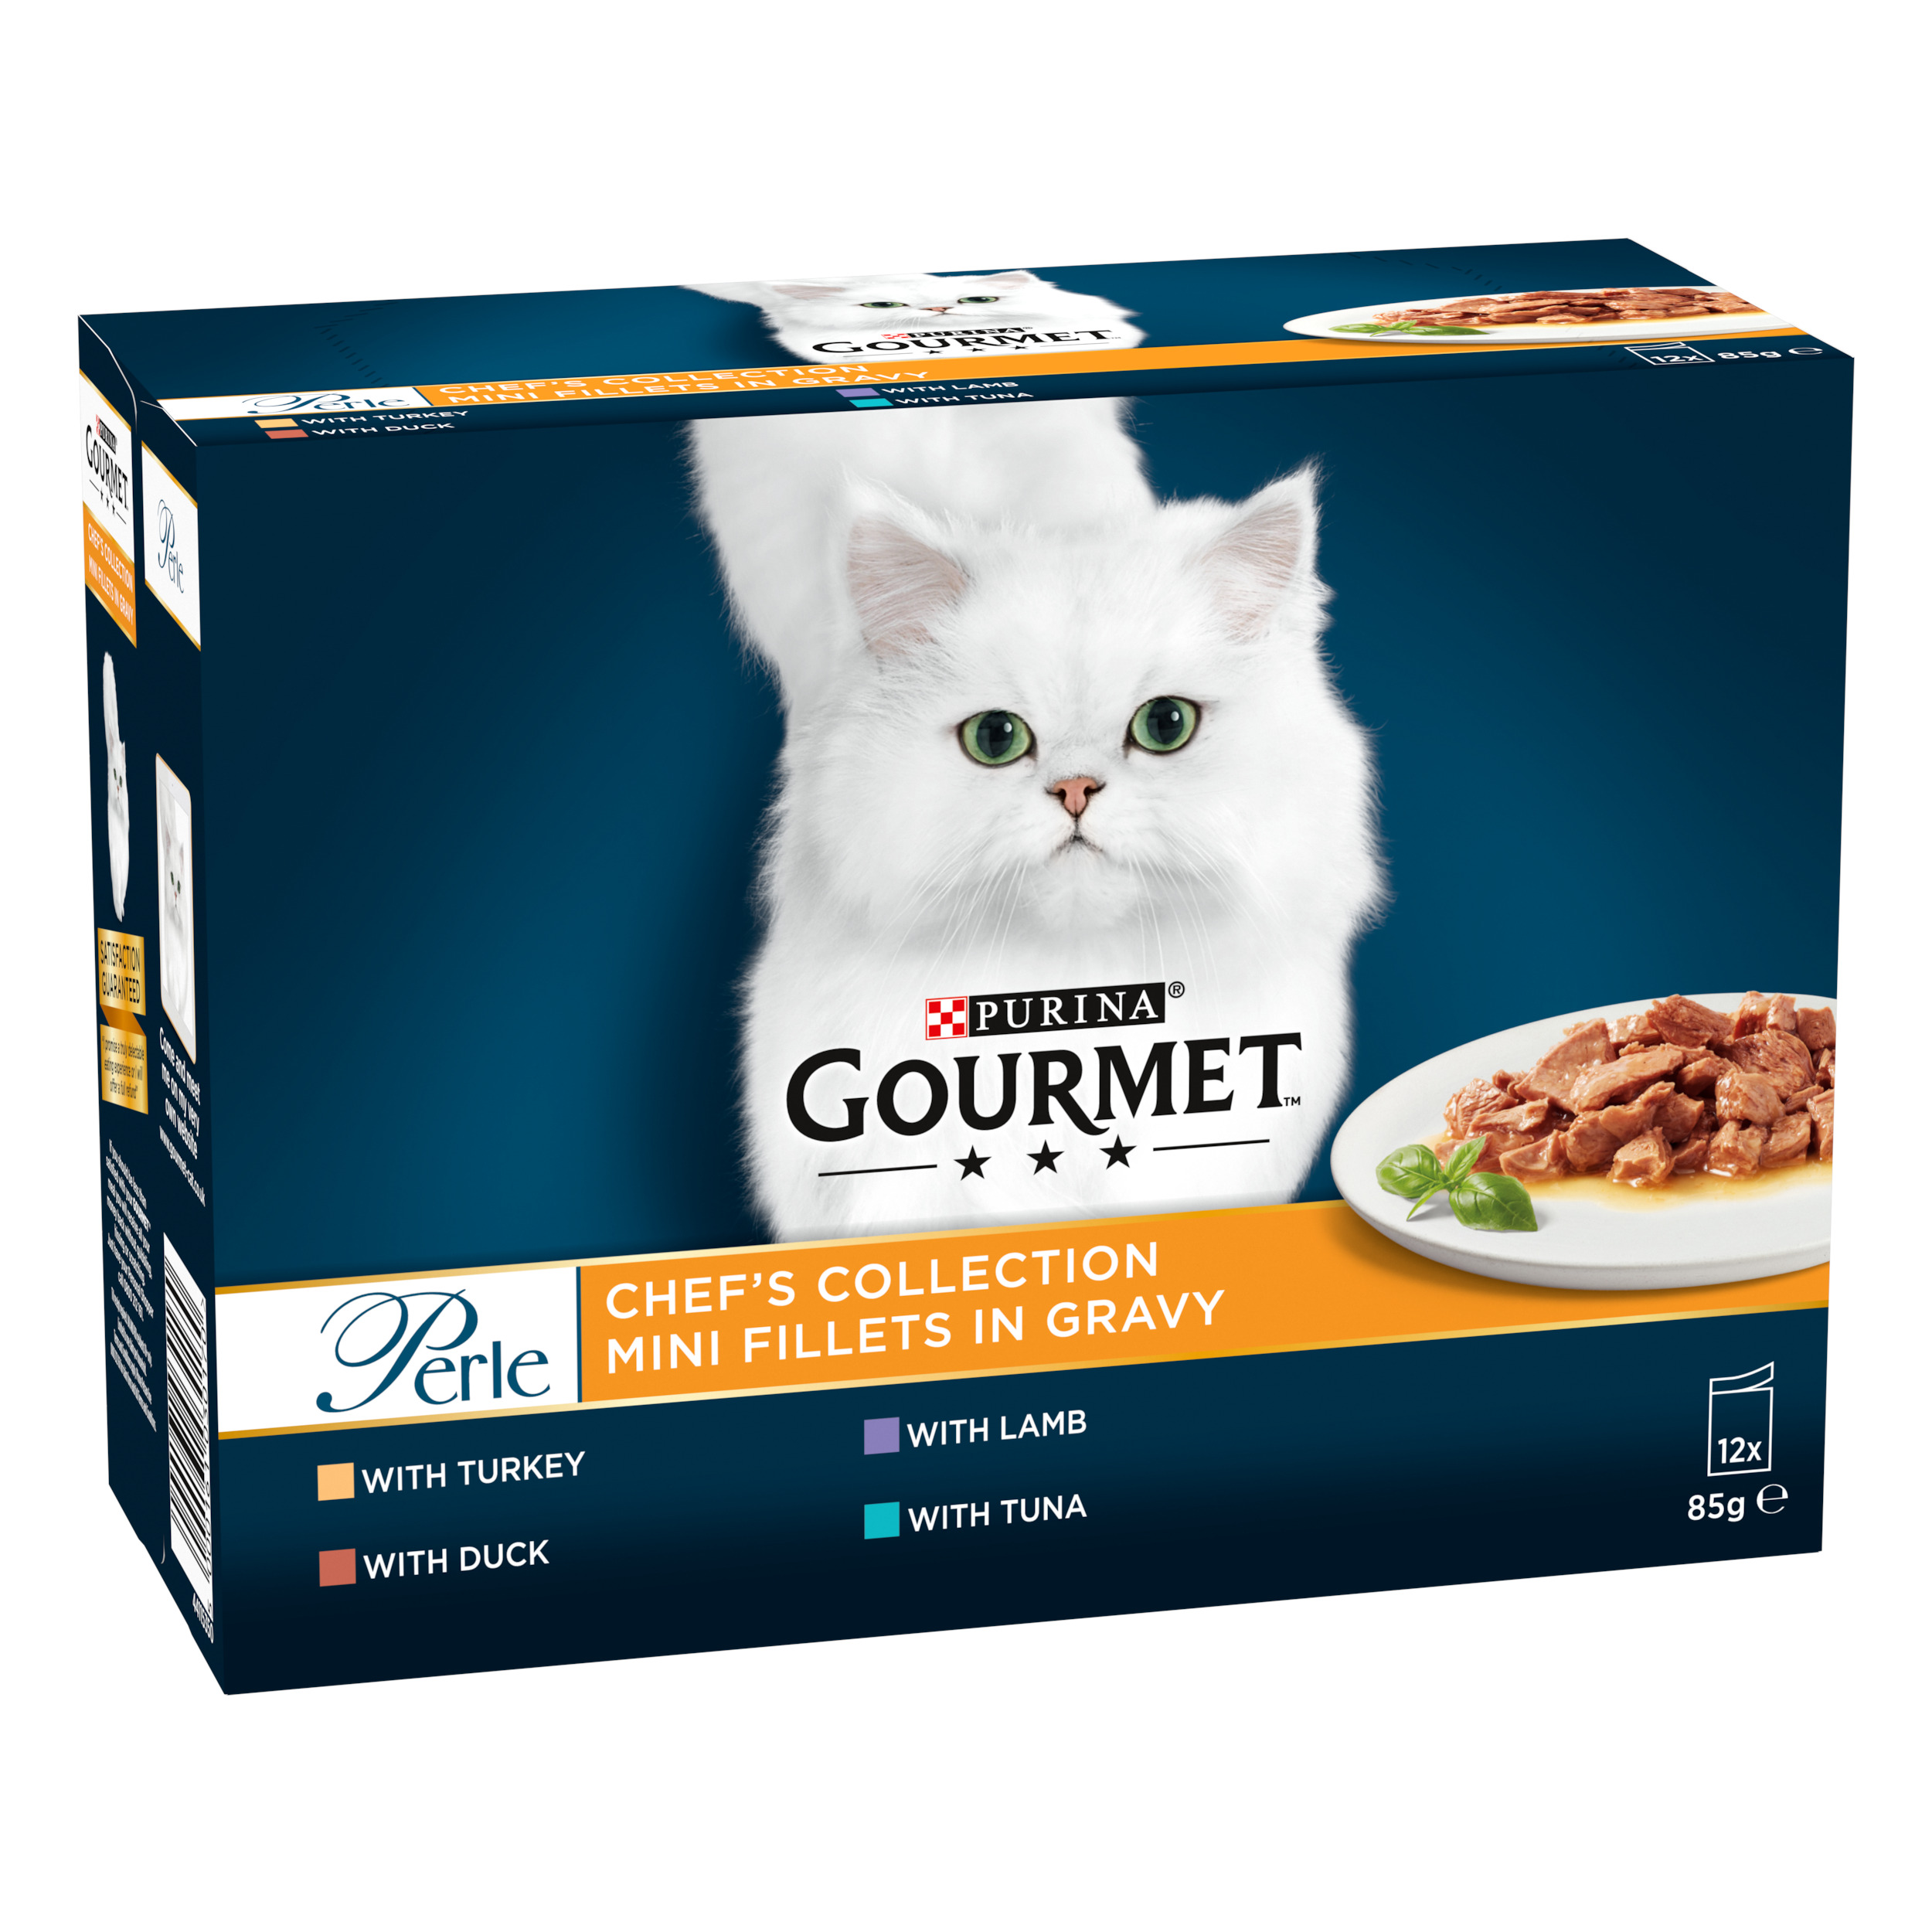 Purina GOURMET® Perle Chef’s Collection Multipack Mini Fillets in Gravy 85g, Pack of 12